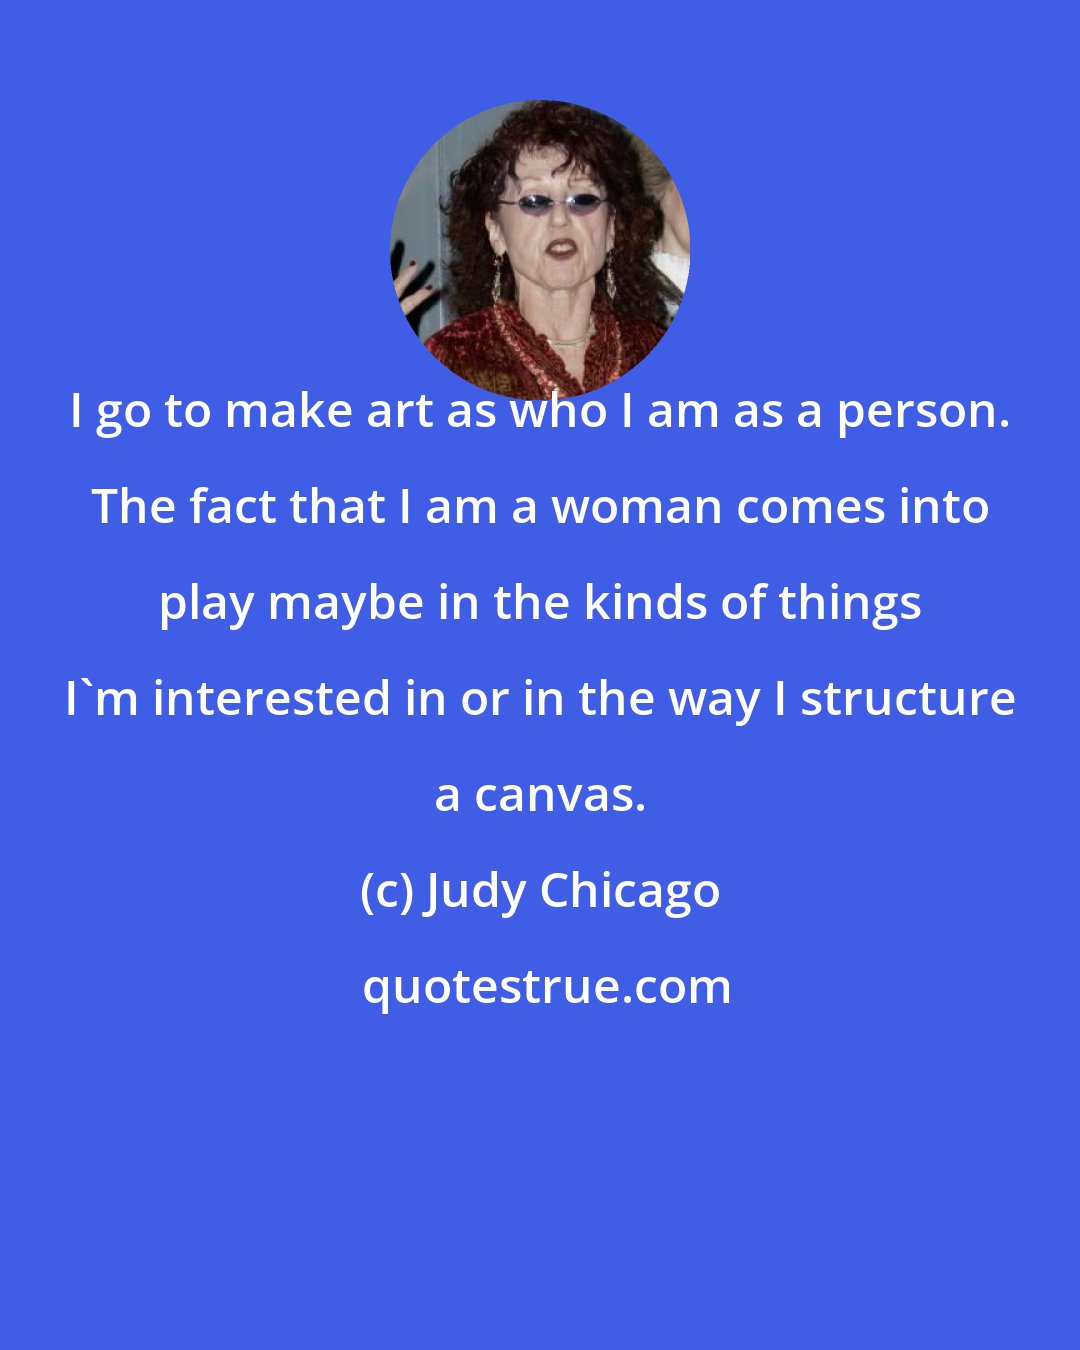 Judy Chicago: I go to make art as who I am as a person. The fact that I am a woman comes into play maybe in the kinds of things I'm interested in or in the way I structure a canvas.